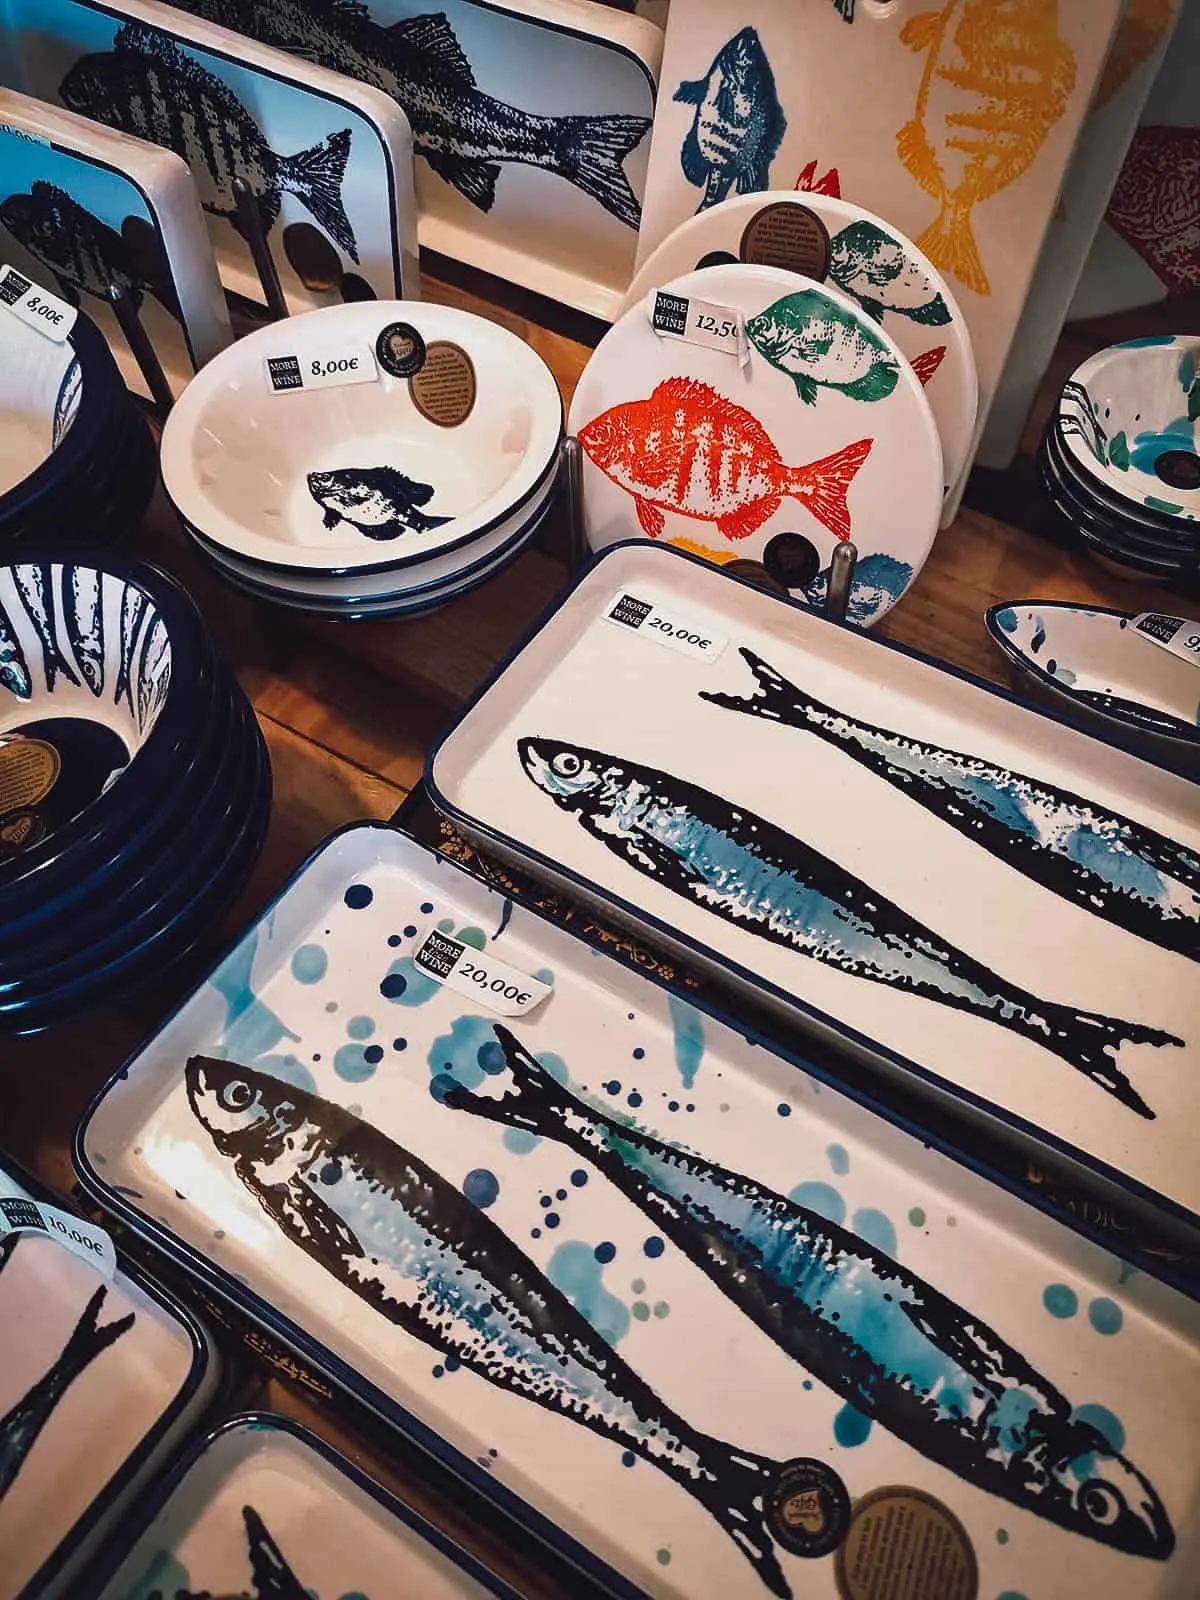 Plates, bowls, and trays with fish designs